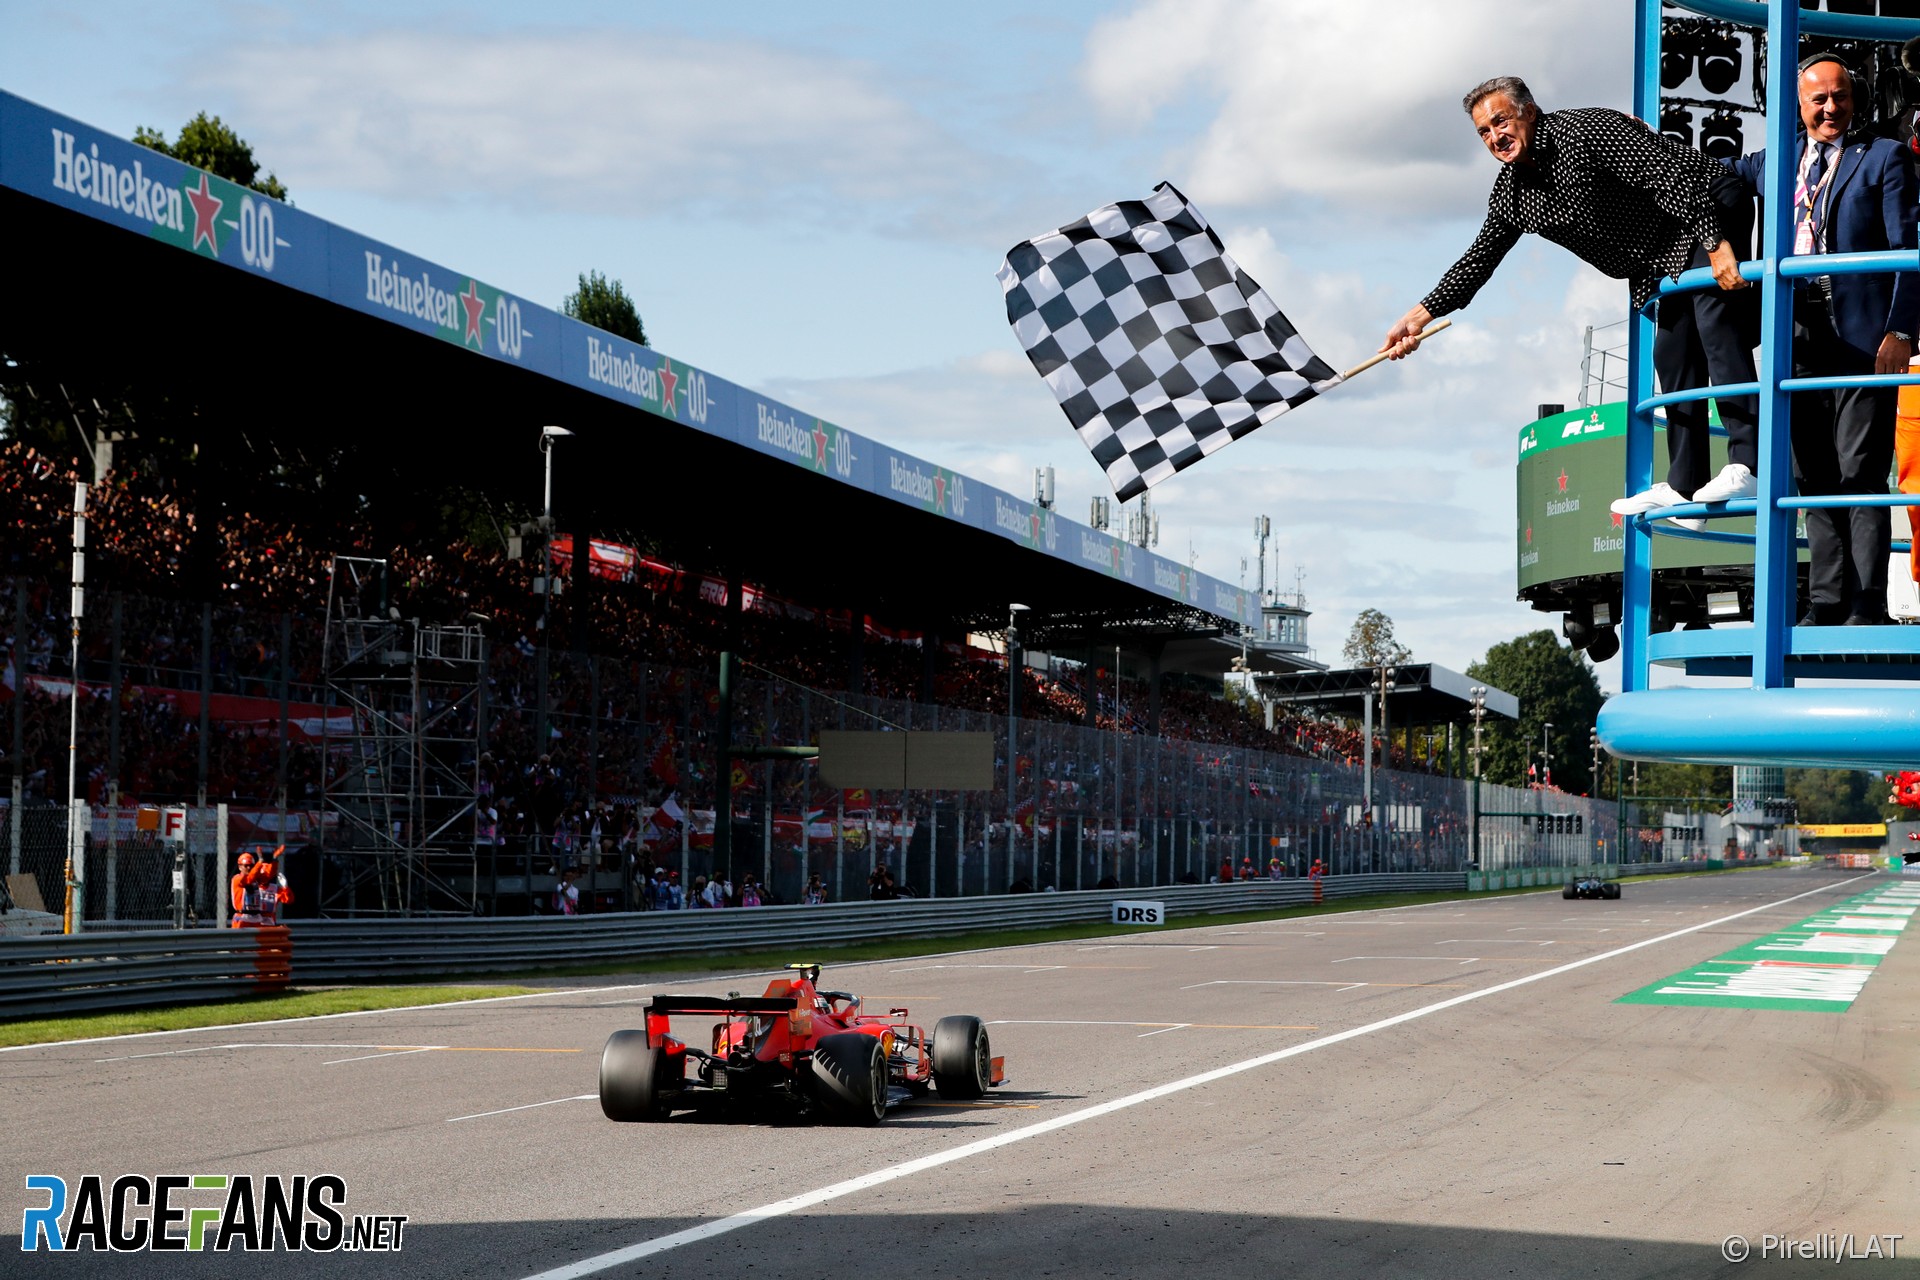 F1 restores traditional chequered flag signal for 2020 season | RaceFans